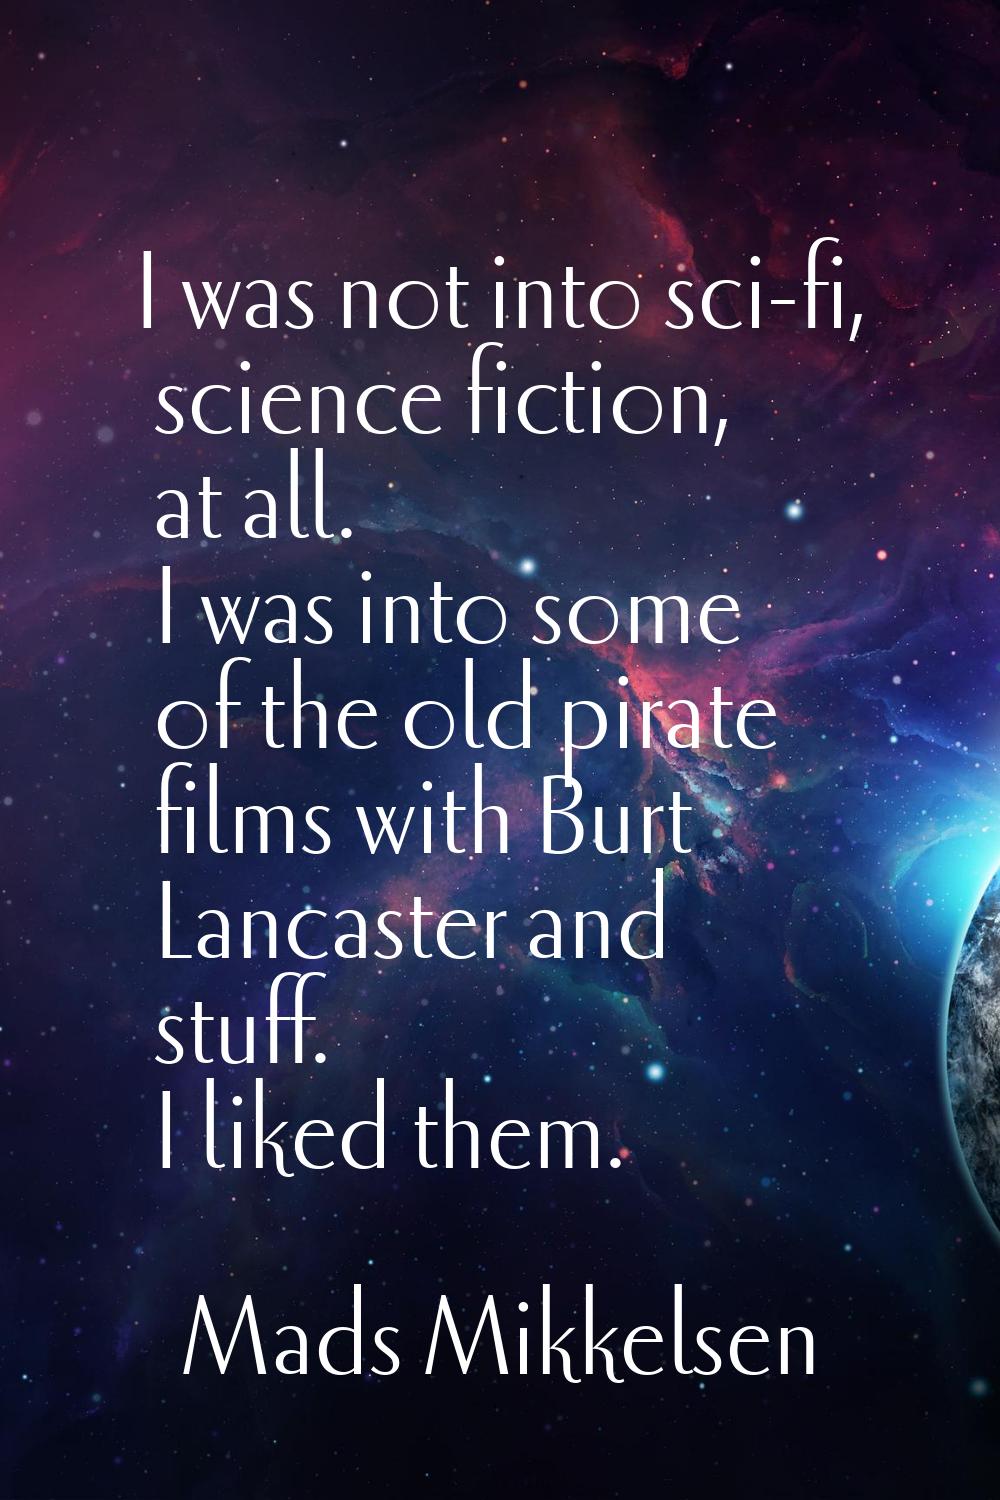 I was not into sci-fi, science fiction, at all. I was into some of the old pirate films with Burt L